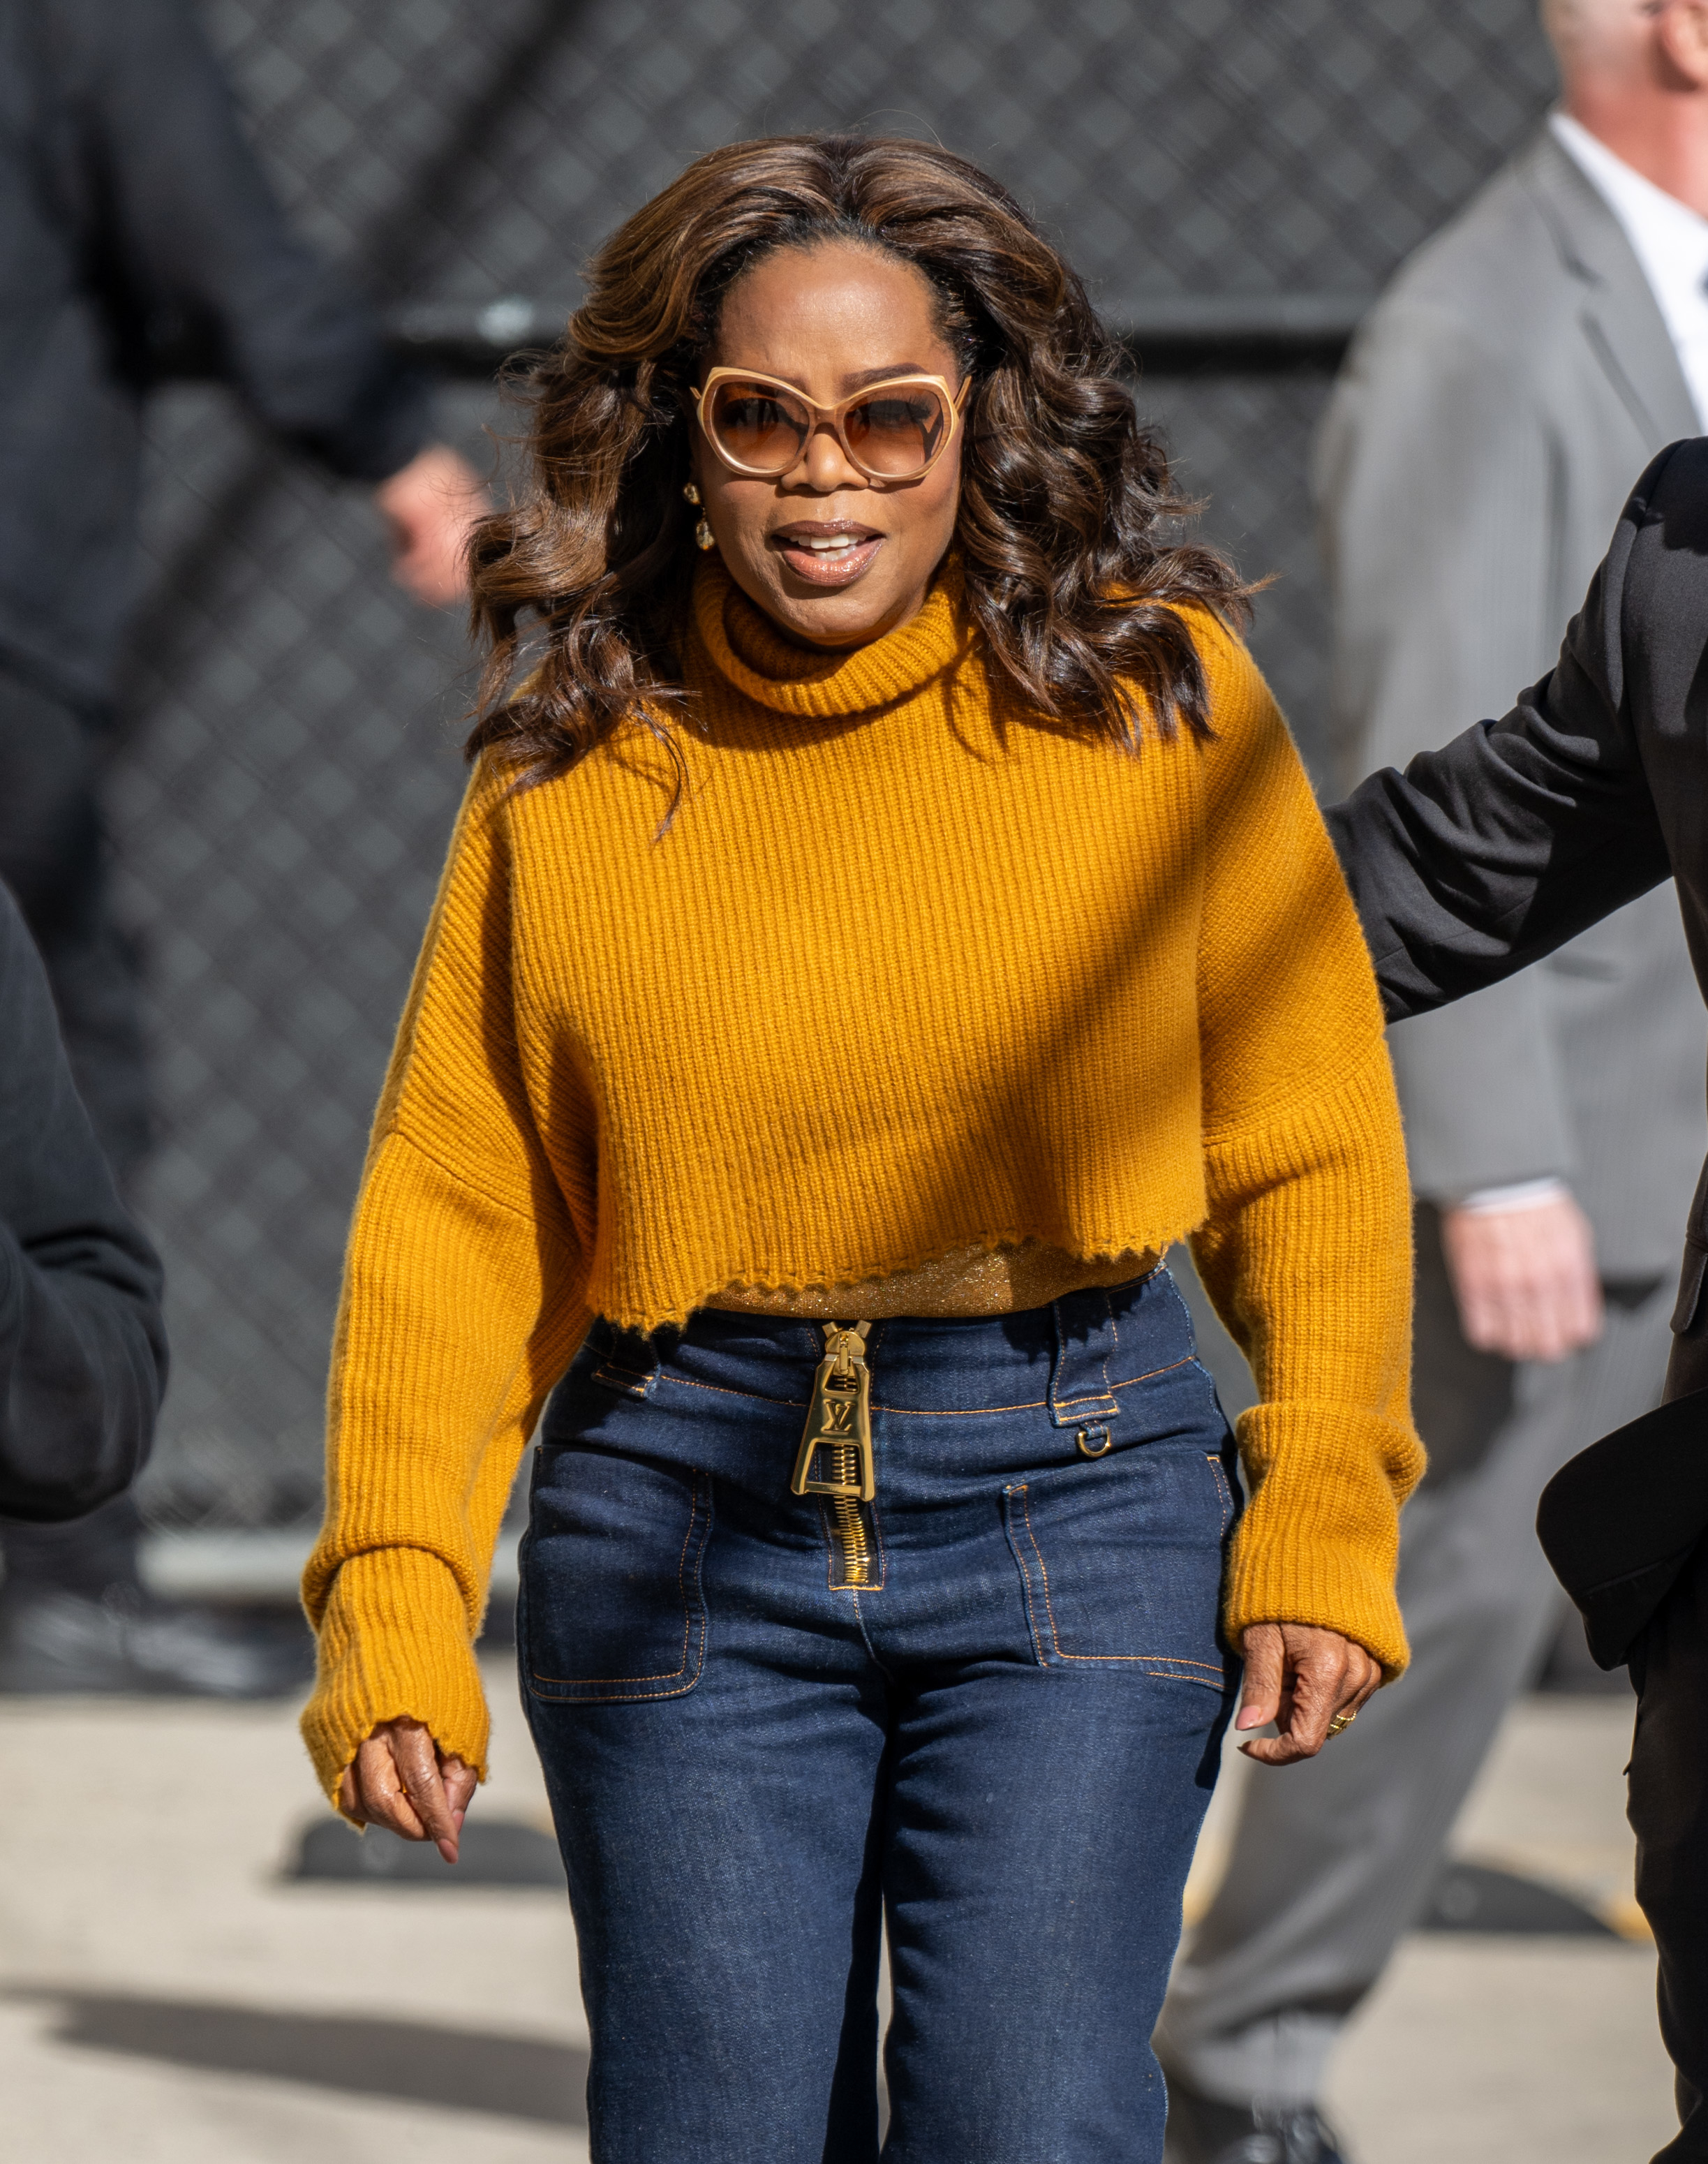 Oprah Winfrey in a yellow knit top and blue jeans, walking with sunglasses on